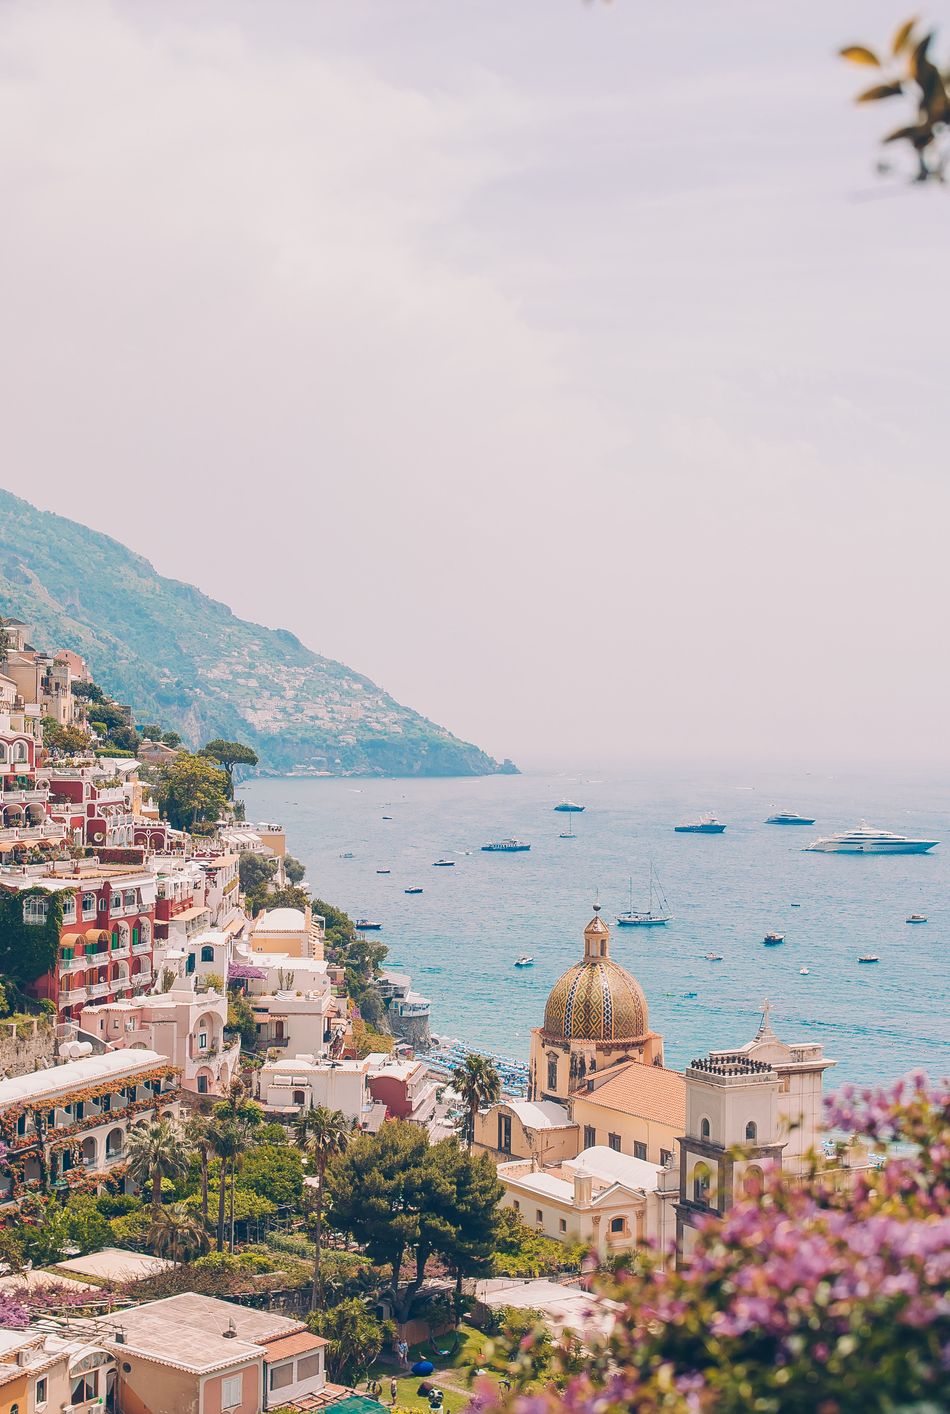 view of the town of positano with flowers